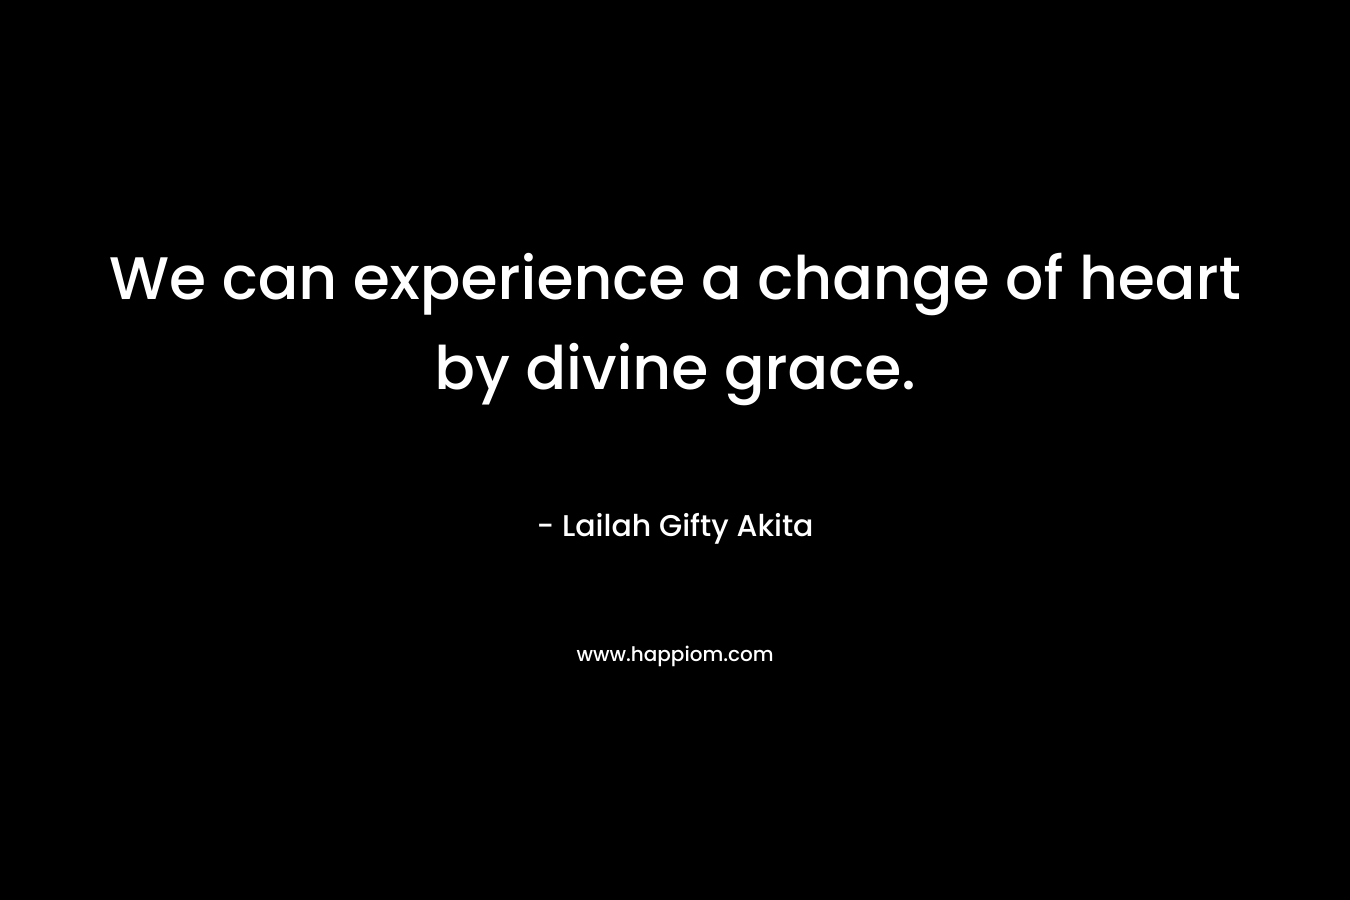 We can experience a change of heart by divine grace.